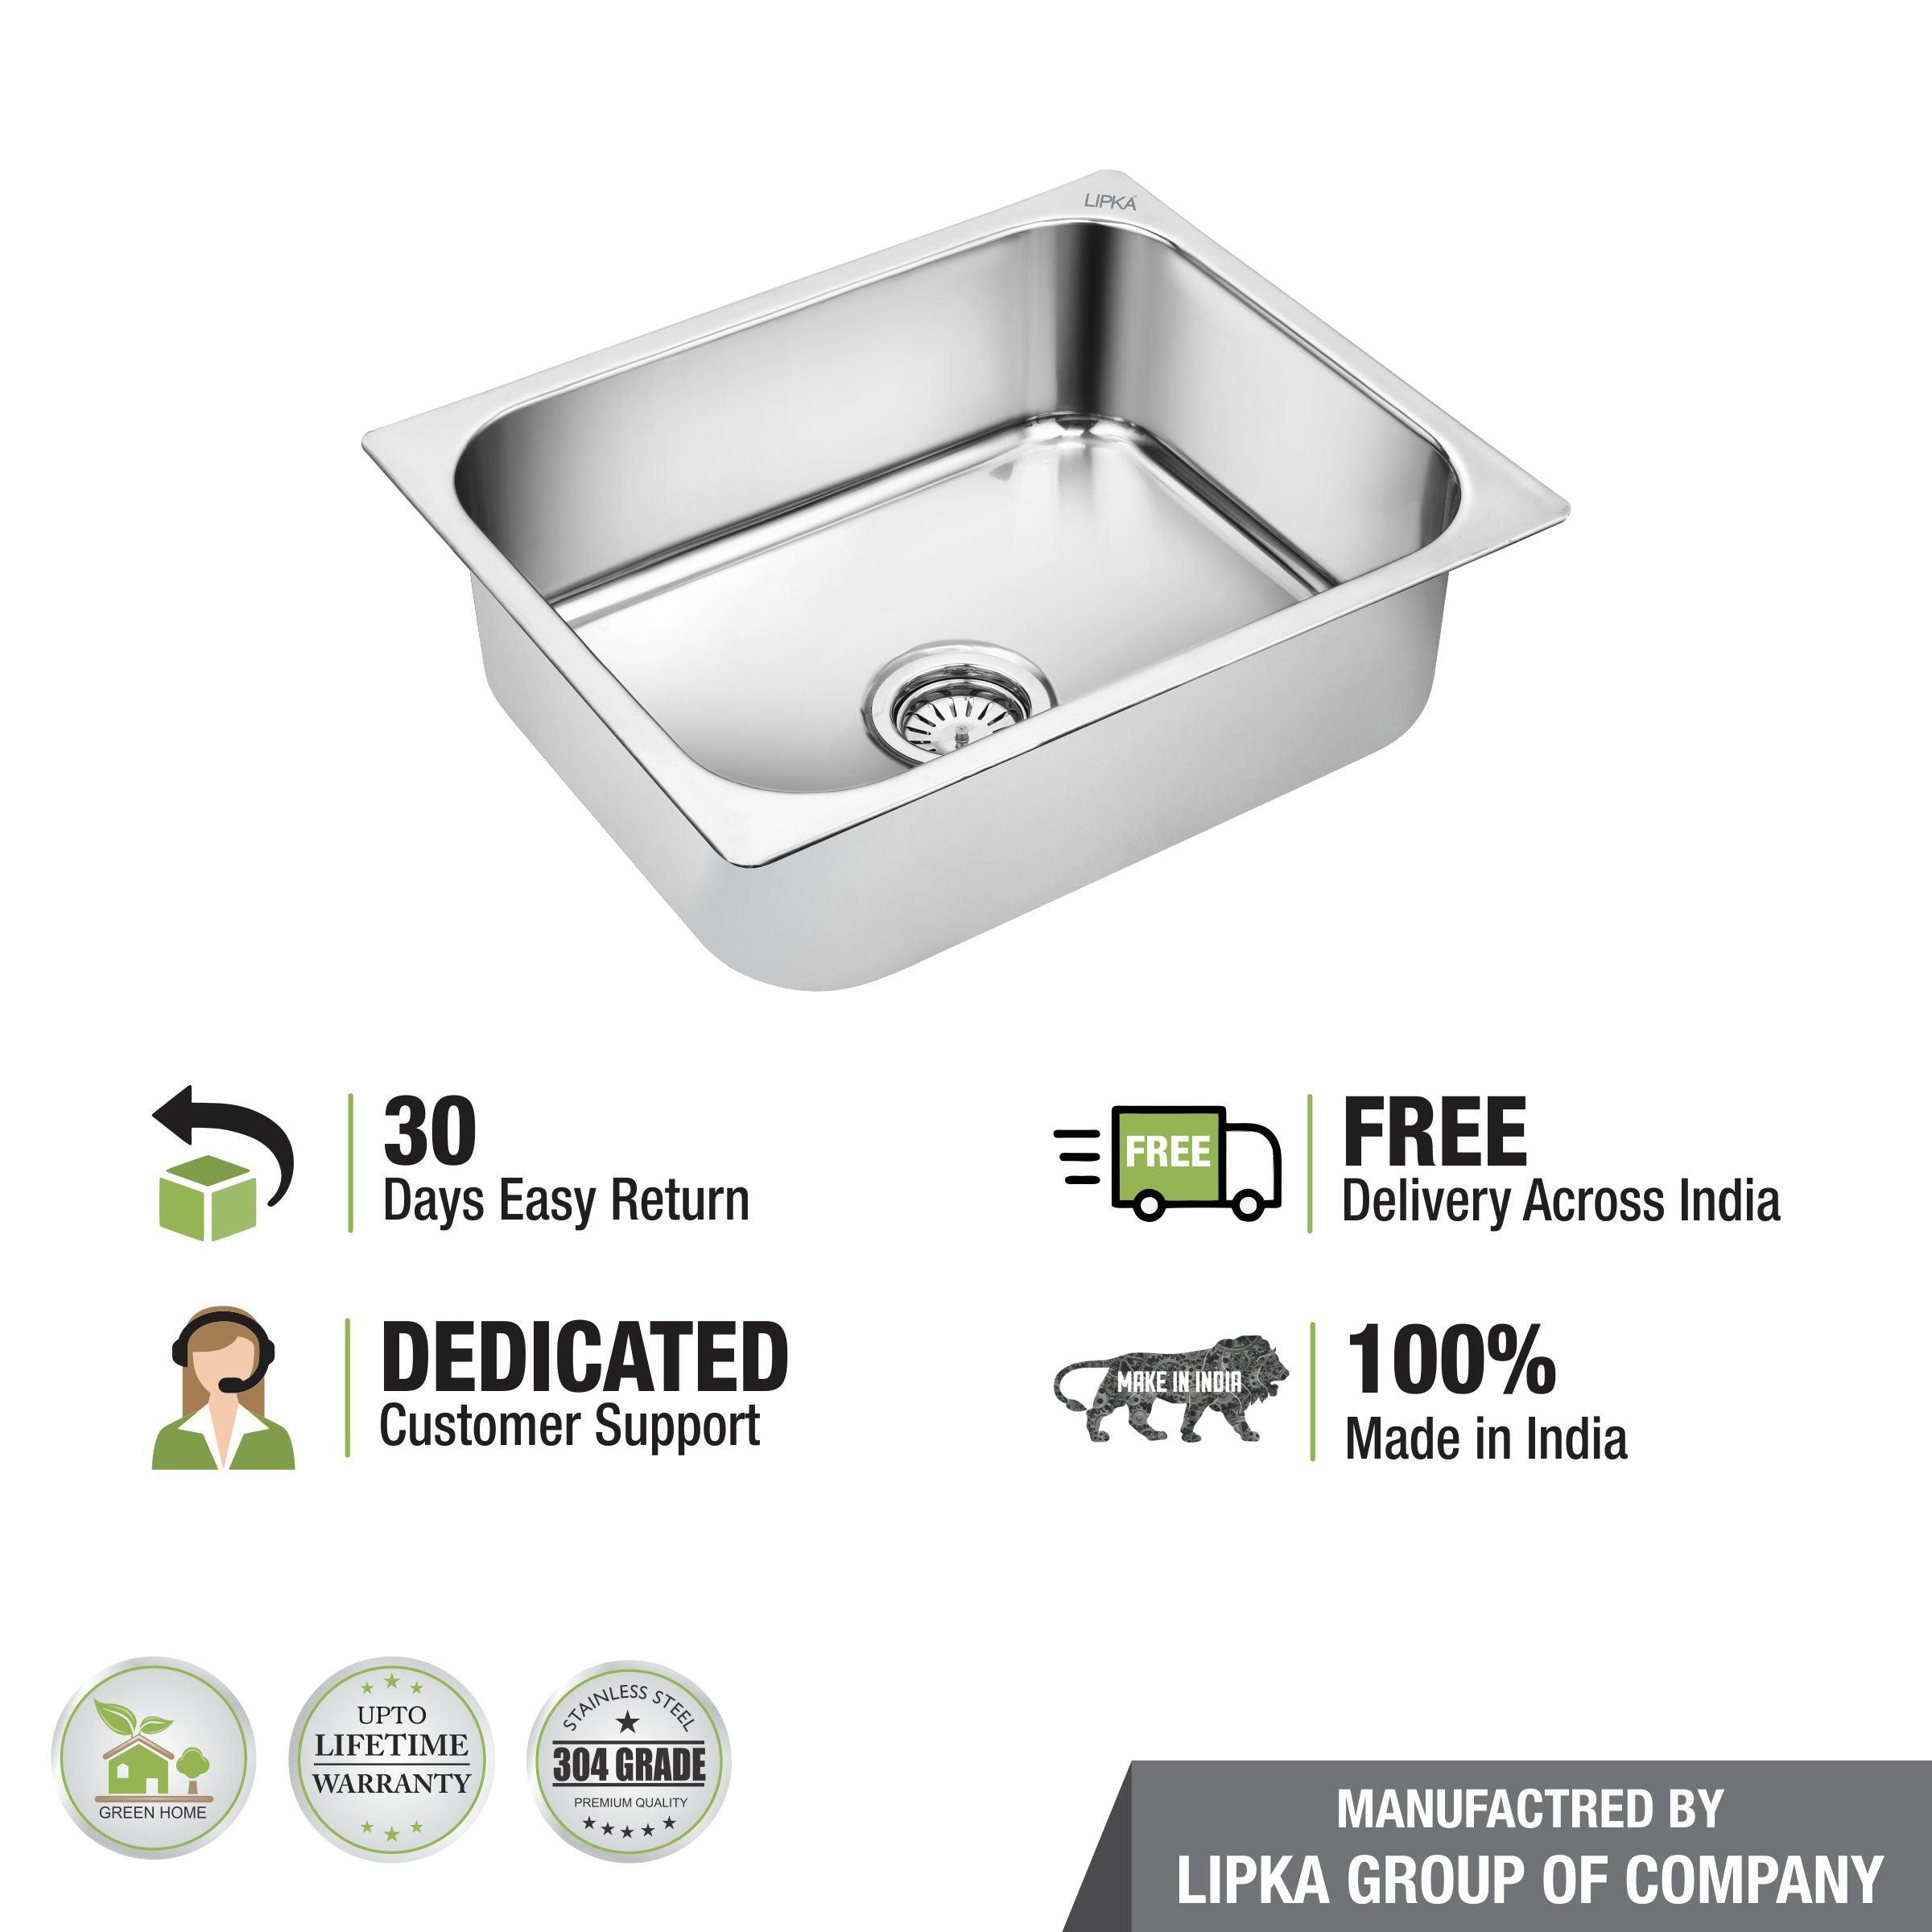 Square Single Bowl 304-Grade Kitchen Sink (22 x 18 Inches) details